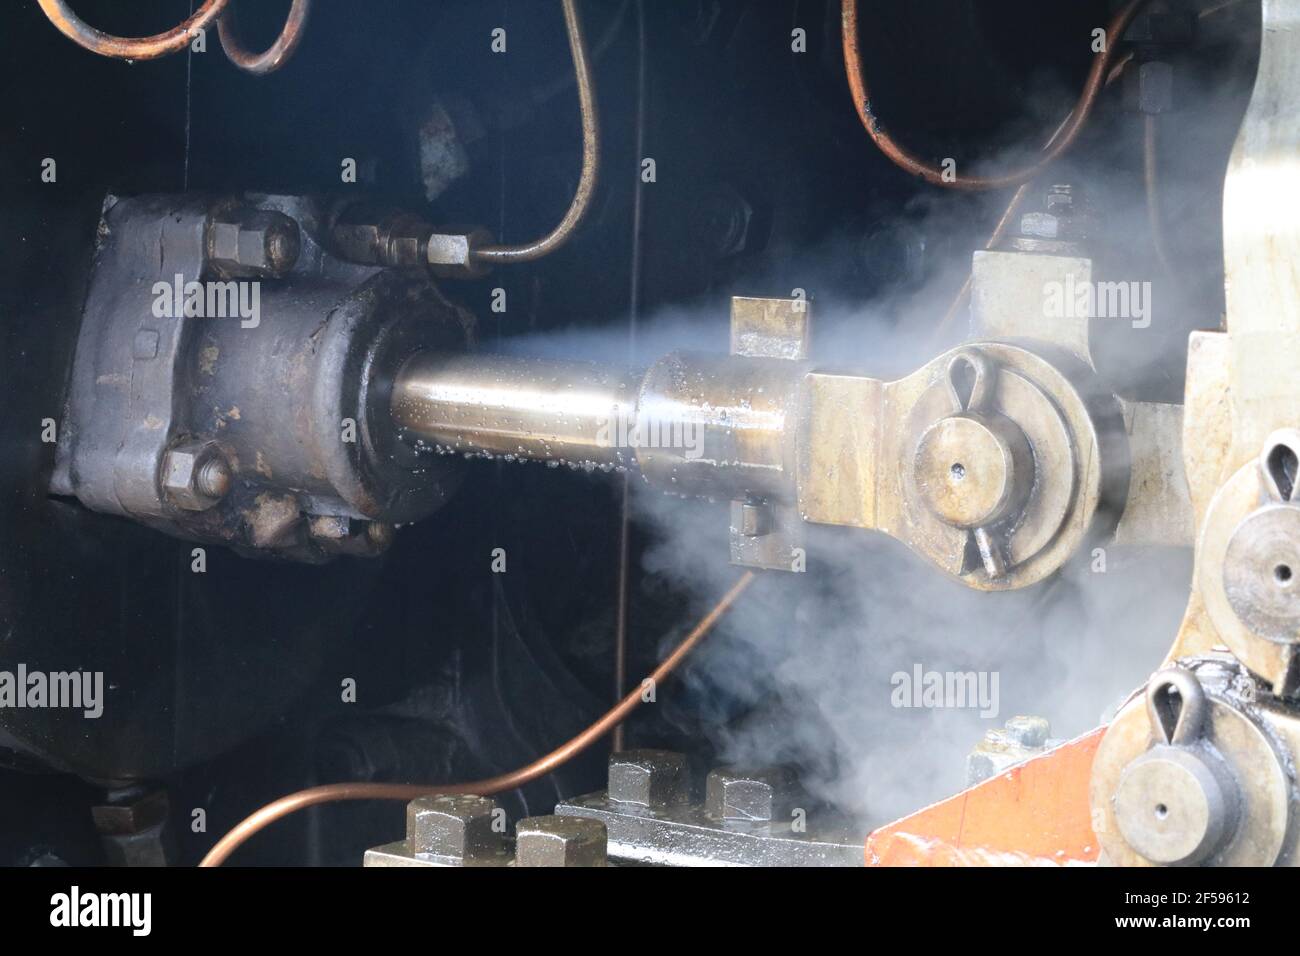 Piston and steam coming out Stock Photo